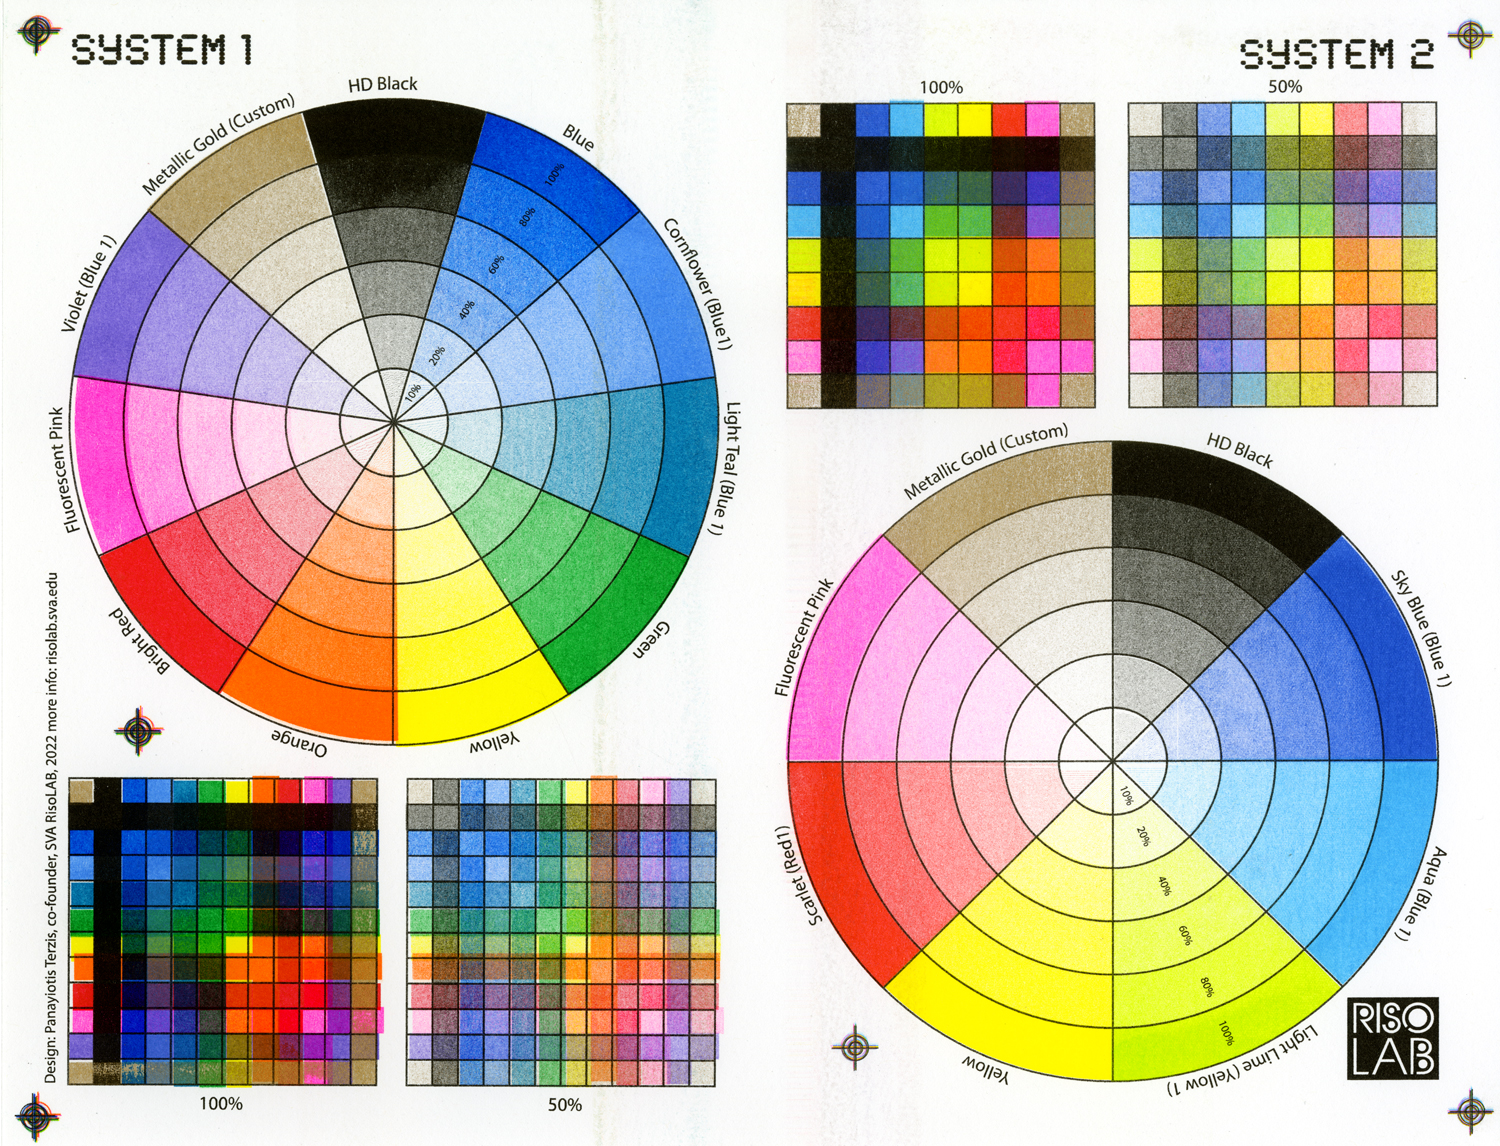 A Chart of all of the colors that are available to print with at the RisoLab. A color wheel on the left side of the page shows the eleven colors that are available to print with from System 1. Underneath this color wheel are two overprint charts showing each color from System 1 overprinted at 100% and 50% saturation. On the right hand side of the page is a color wheel depicting the 8 colors that are available in the System 2 color system. Above the System 2 color wheel are the 100% and 50% overprint charts for the System 2 colors.